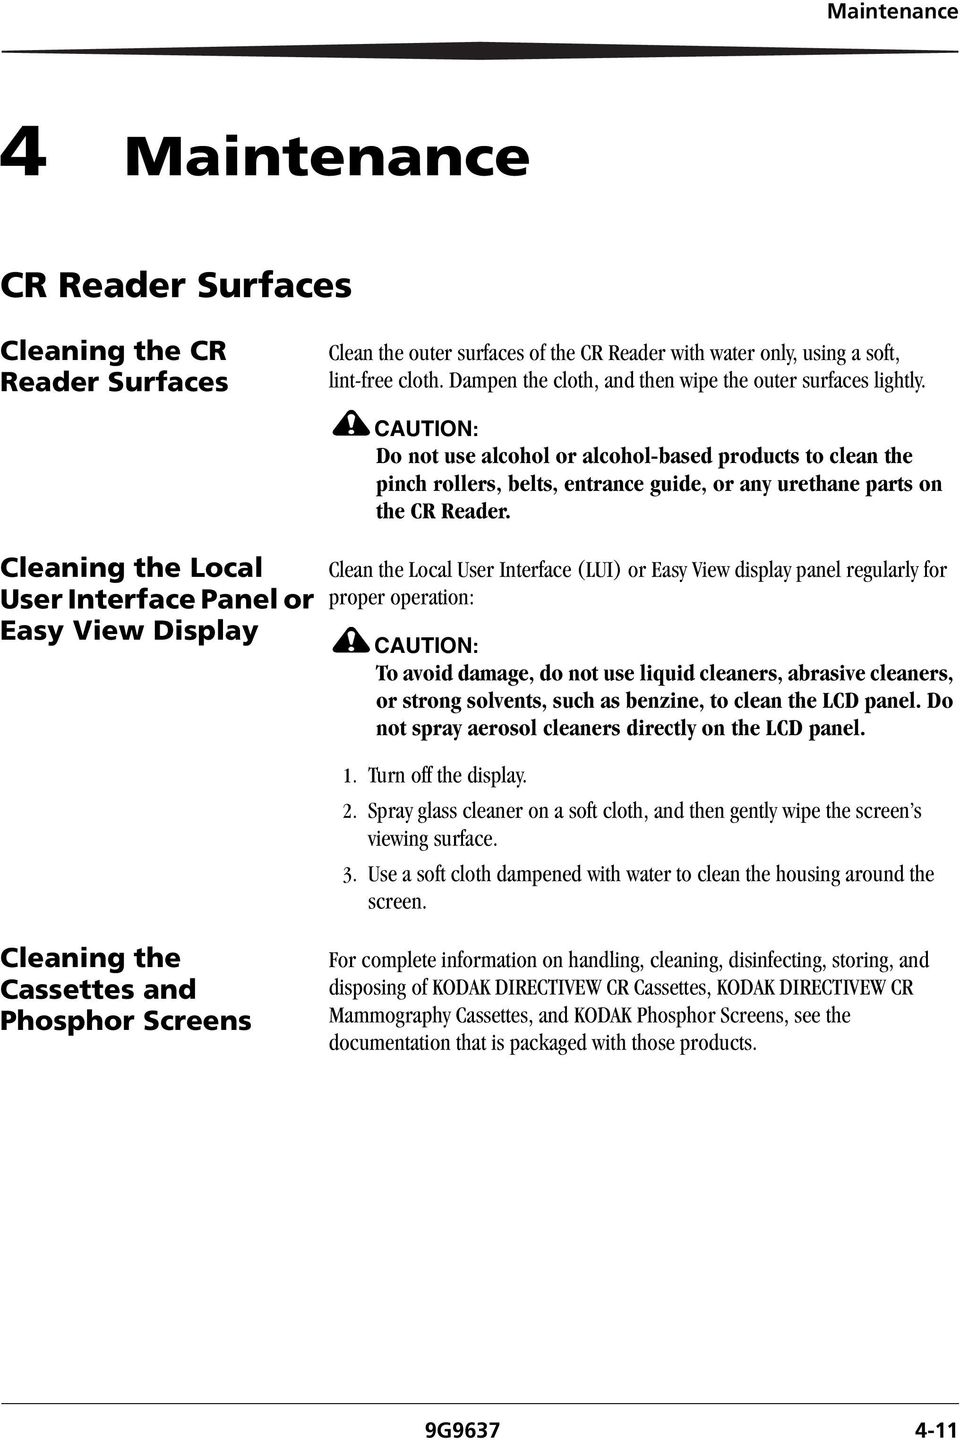 Cleaning the Local User Interface Panel or Easy View Display CAUTION: Do not use alcohol or alcohol-based products to clean the pinch rollers, belts, entrance guide, or any urethane parts on the CR